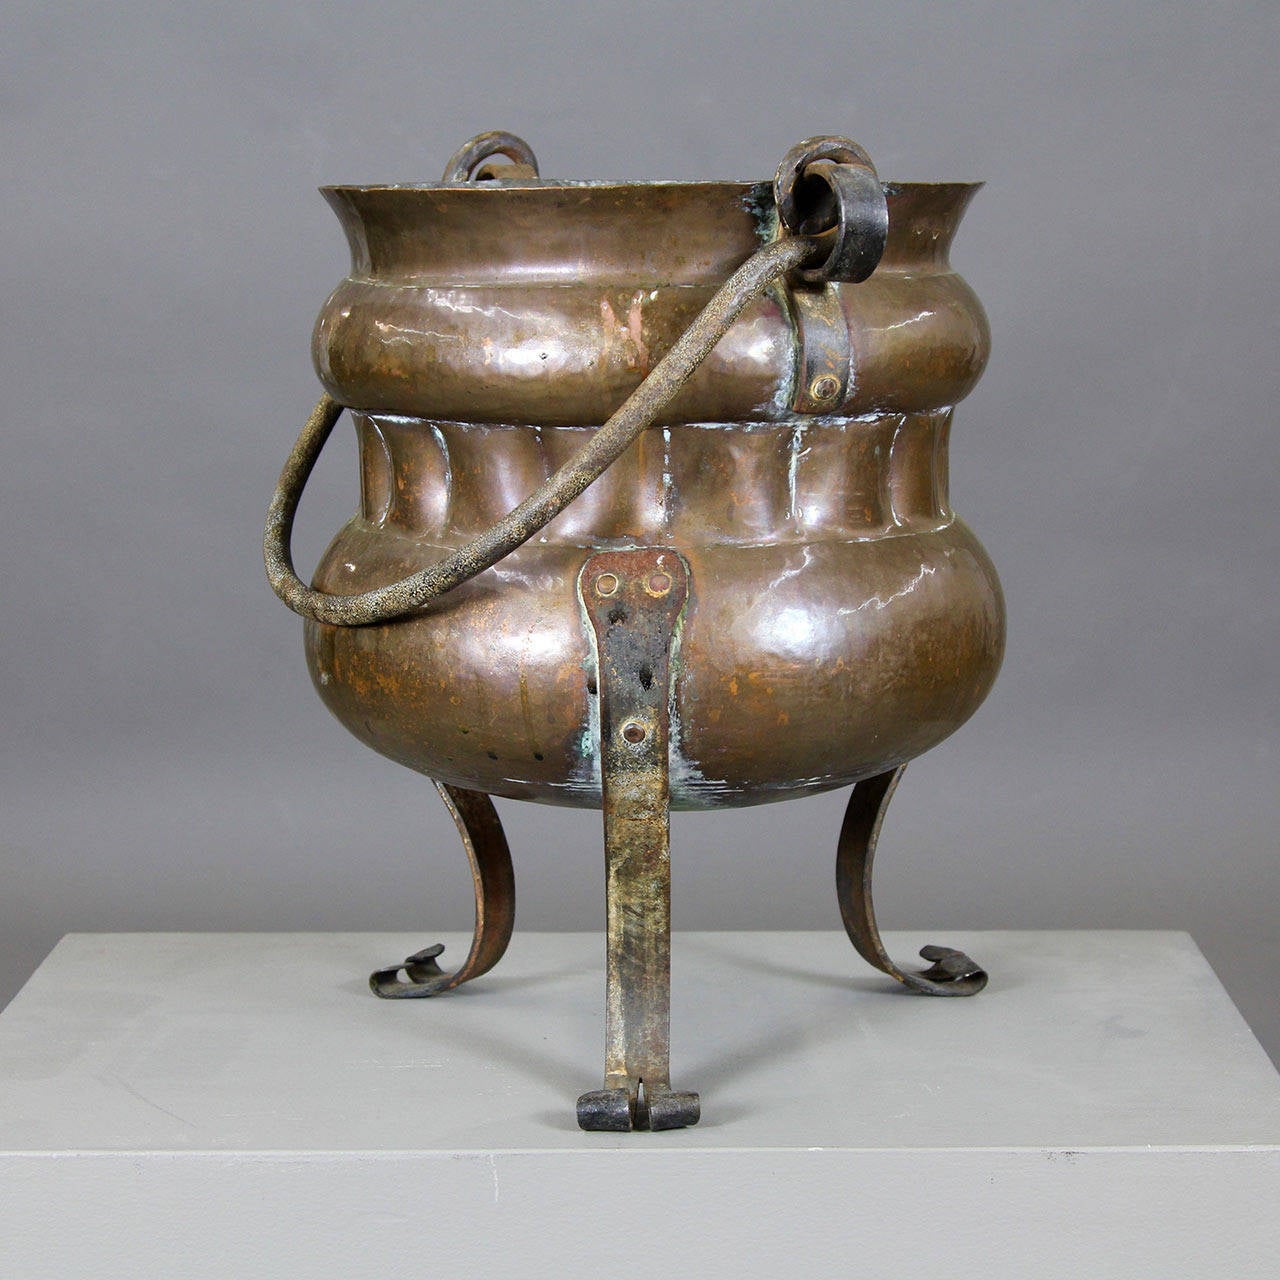 Fantastic 19th century copper footed log bucket with hand-wrought iron bail handle. Impressive and sturdy vessel for holding fireplace logs and tinder, or for use as a wine cooler or decorative planter for flowers or winter or holiday greens.